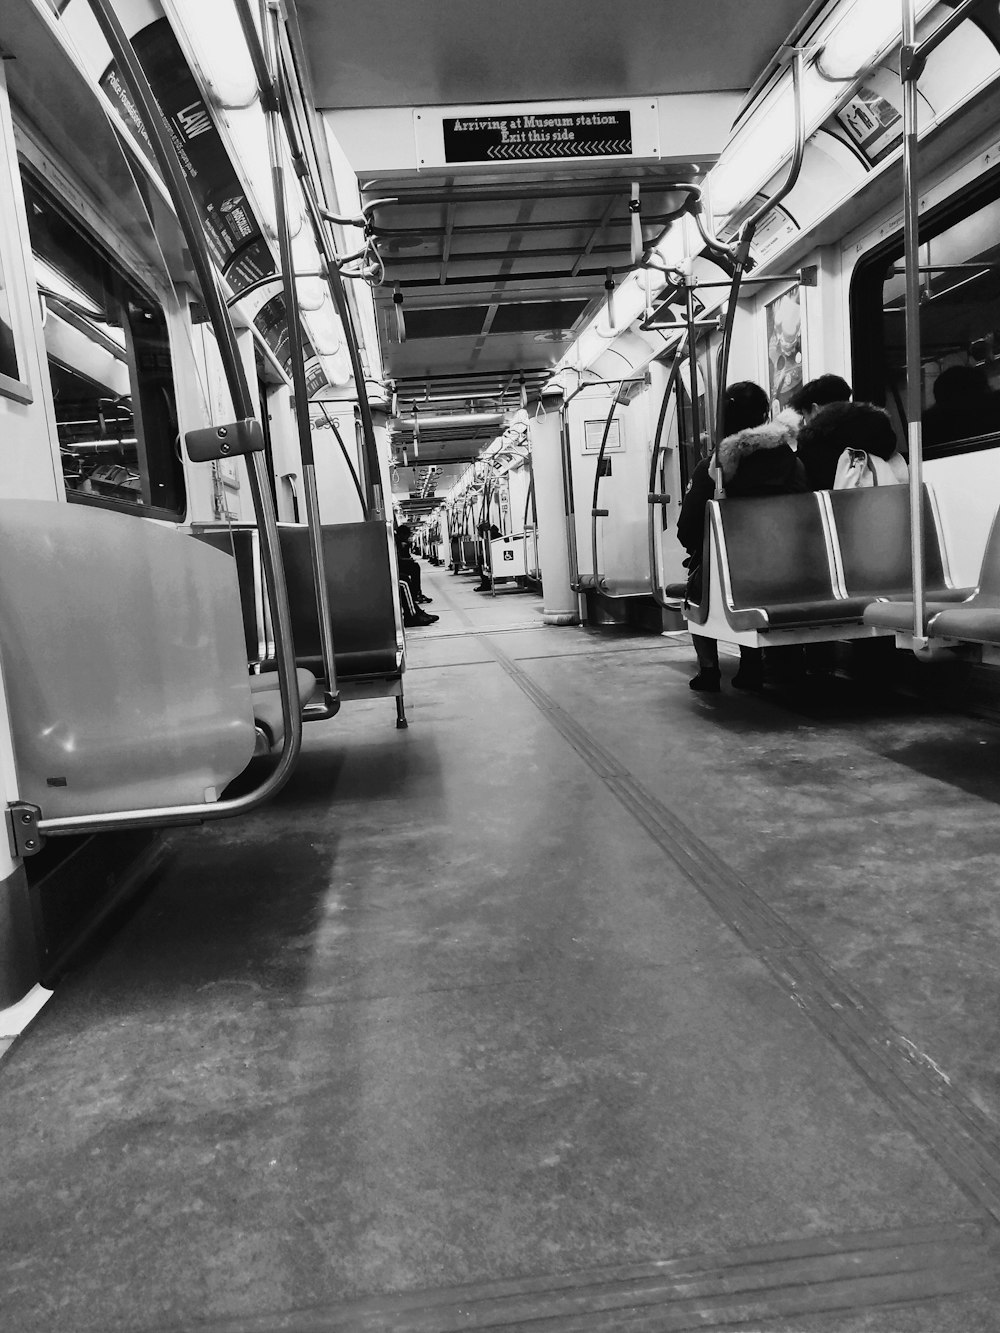 grayscale photography of train interior